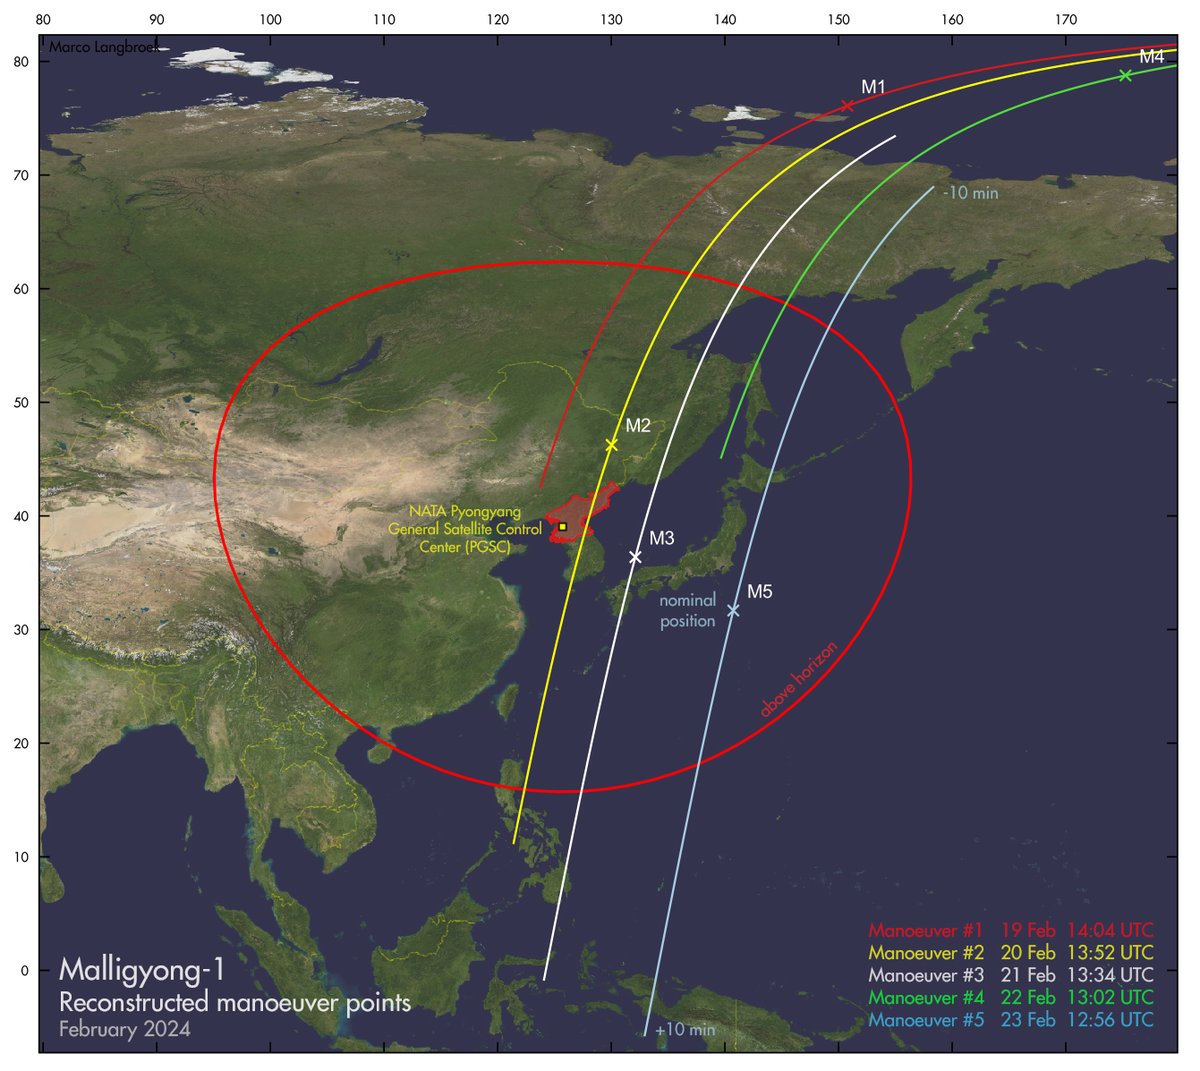 I just published a second brief analysis in @tsr on the recent orbit raising manoeuvers of the #North #Korean satellite #Malligyong-1. In it, I reconstruct the likely time and place of these manoeuvers. thespacereview.com/article/4772/1